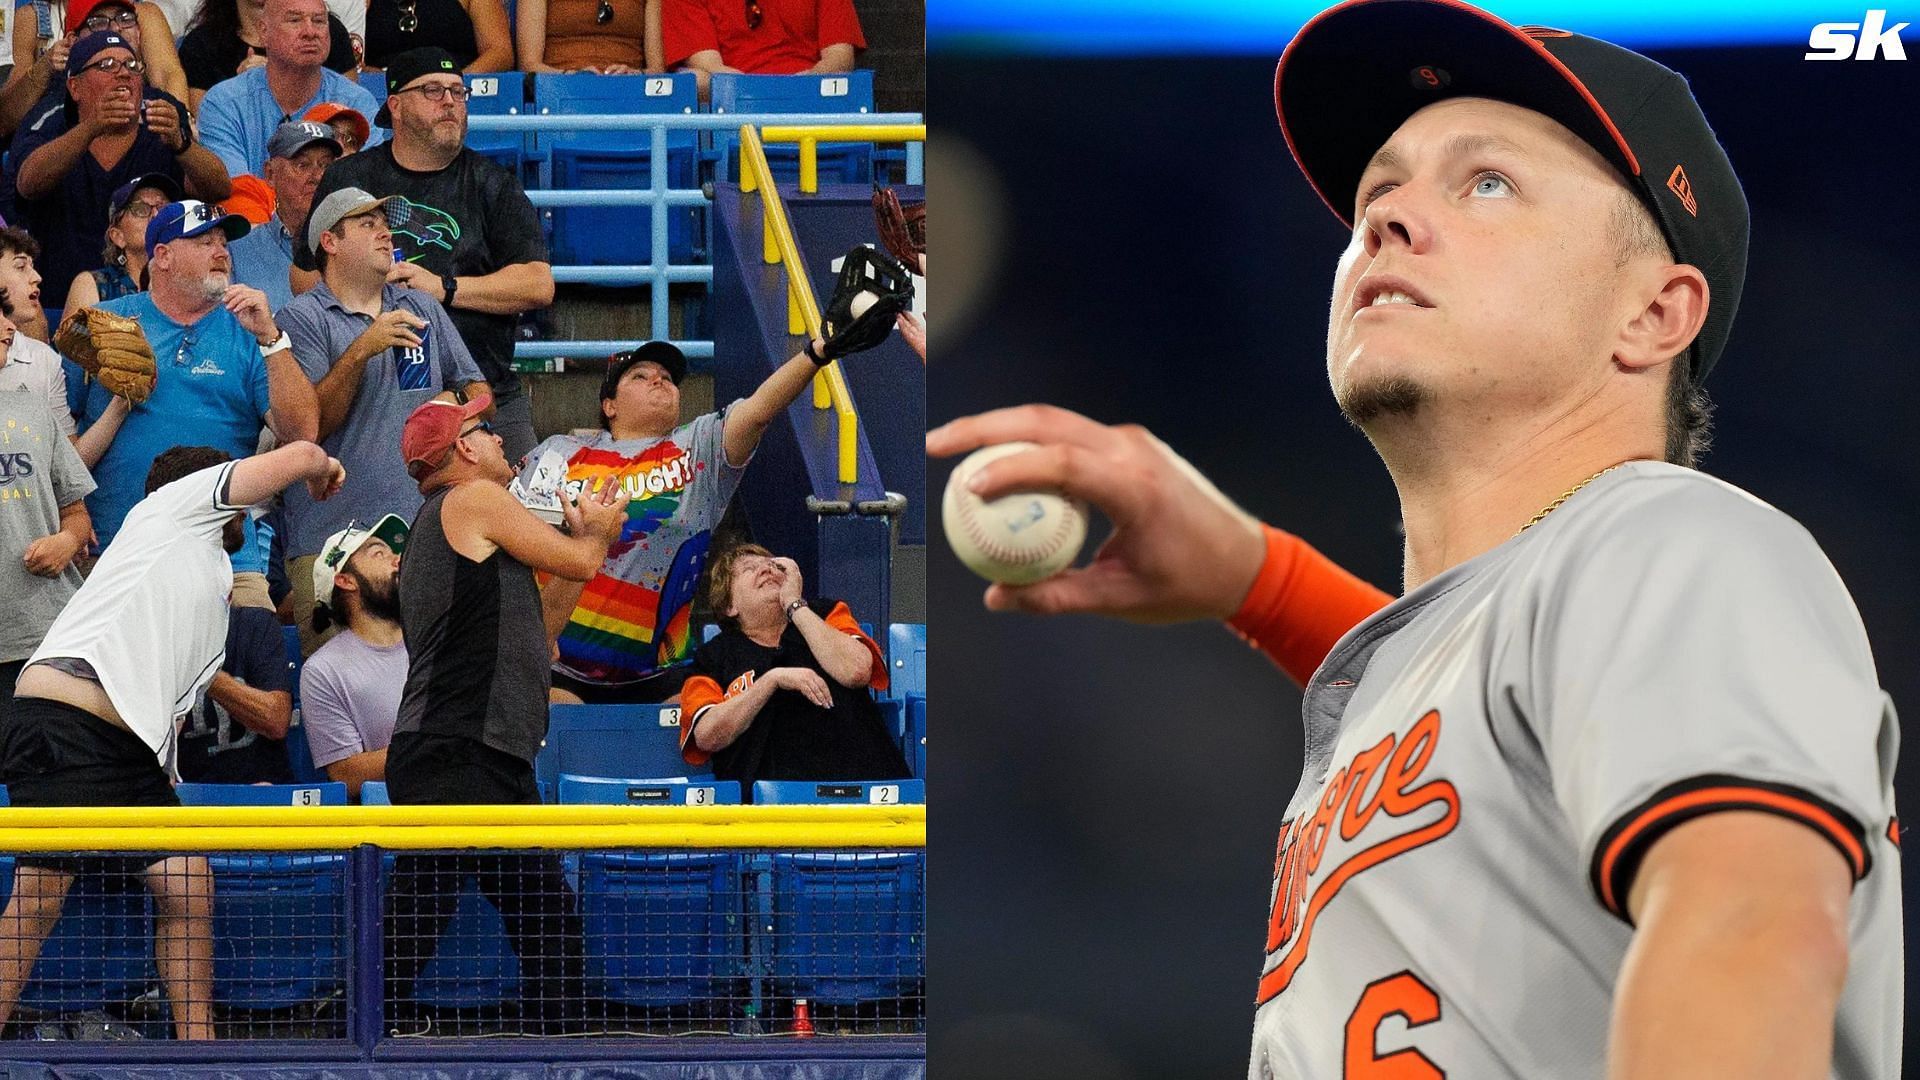 MLB fans react as Orioles fan makes impressive one hand catch